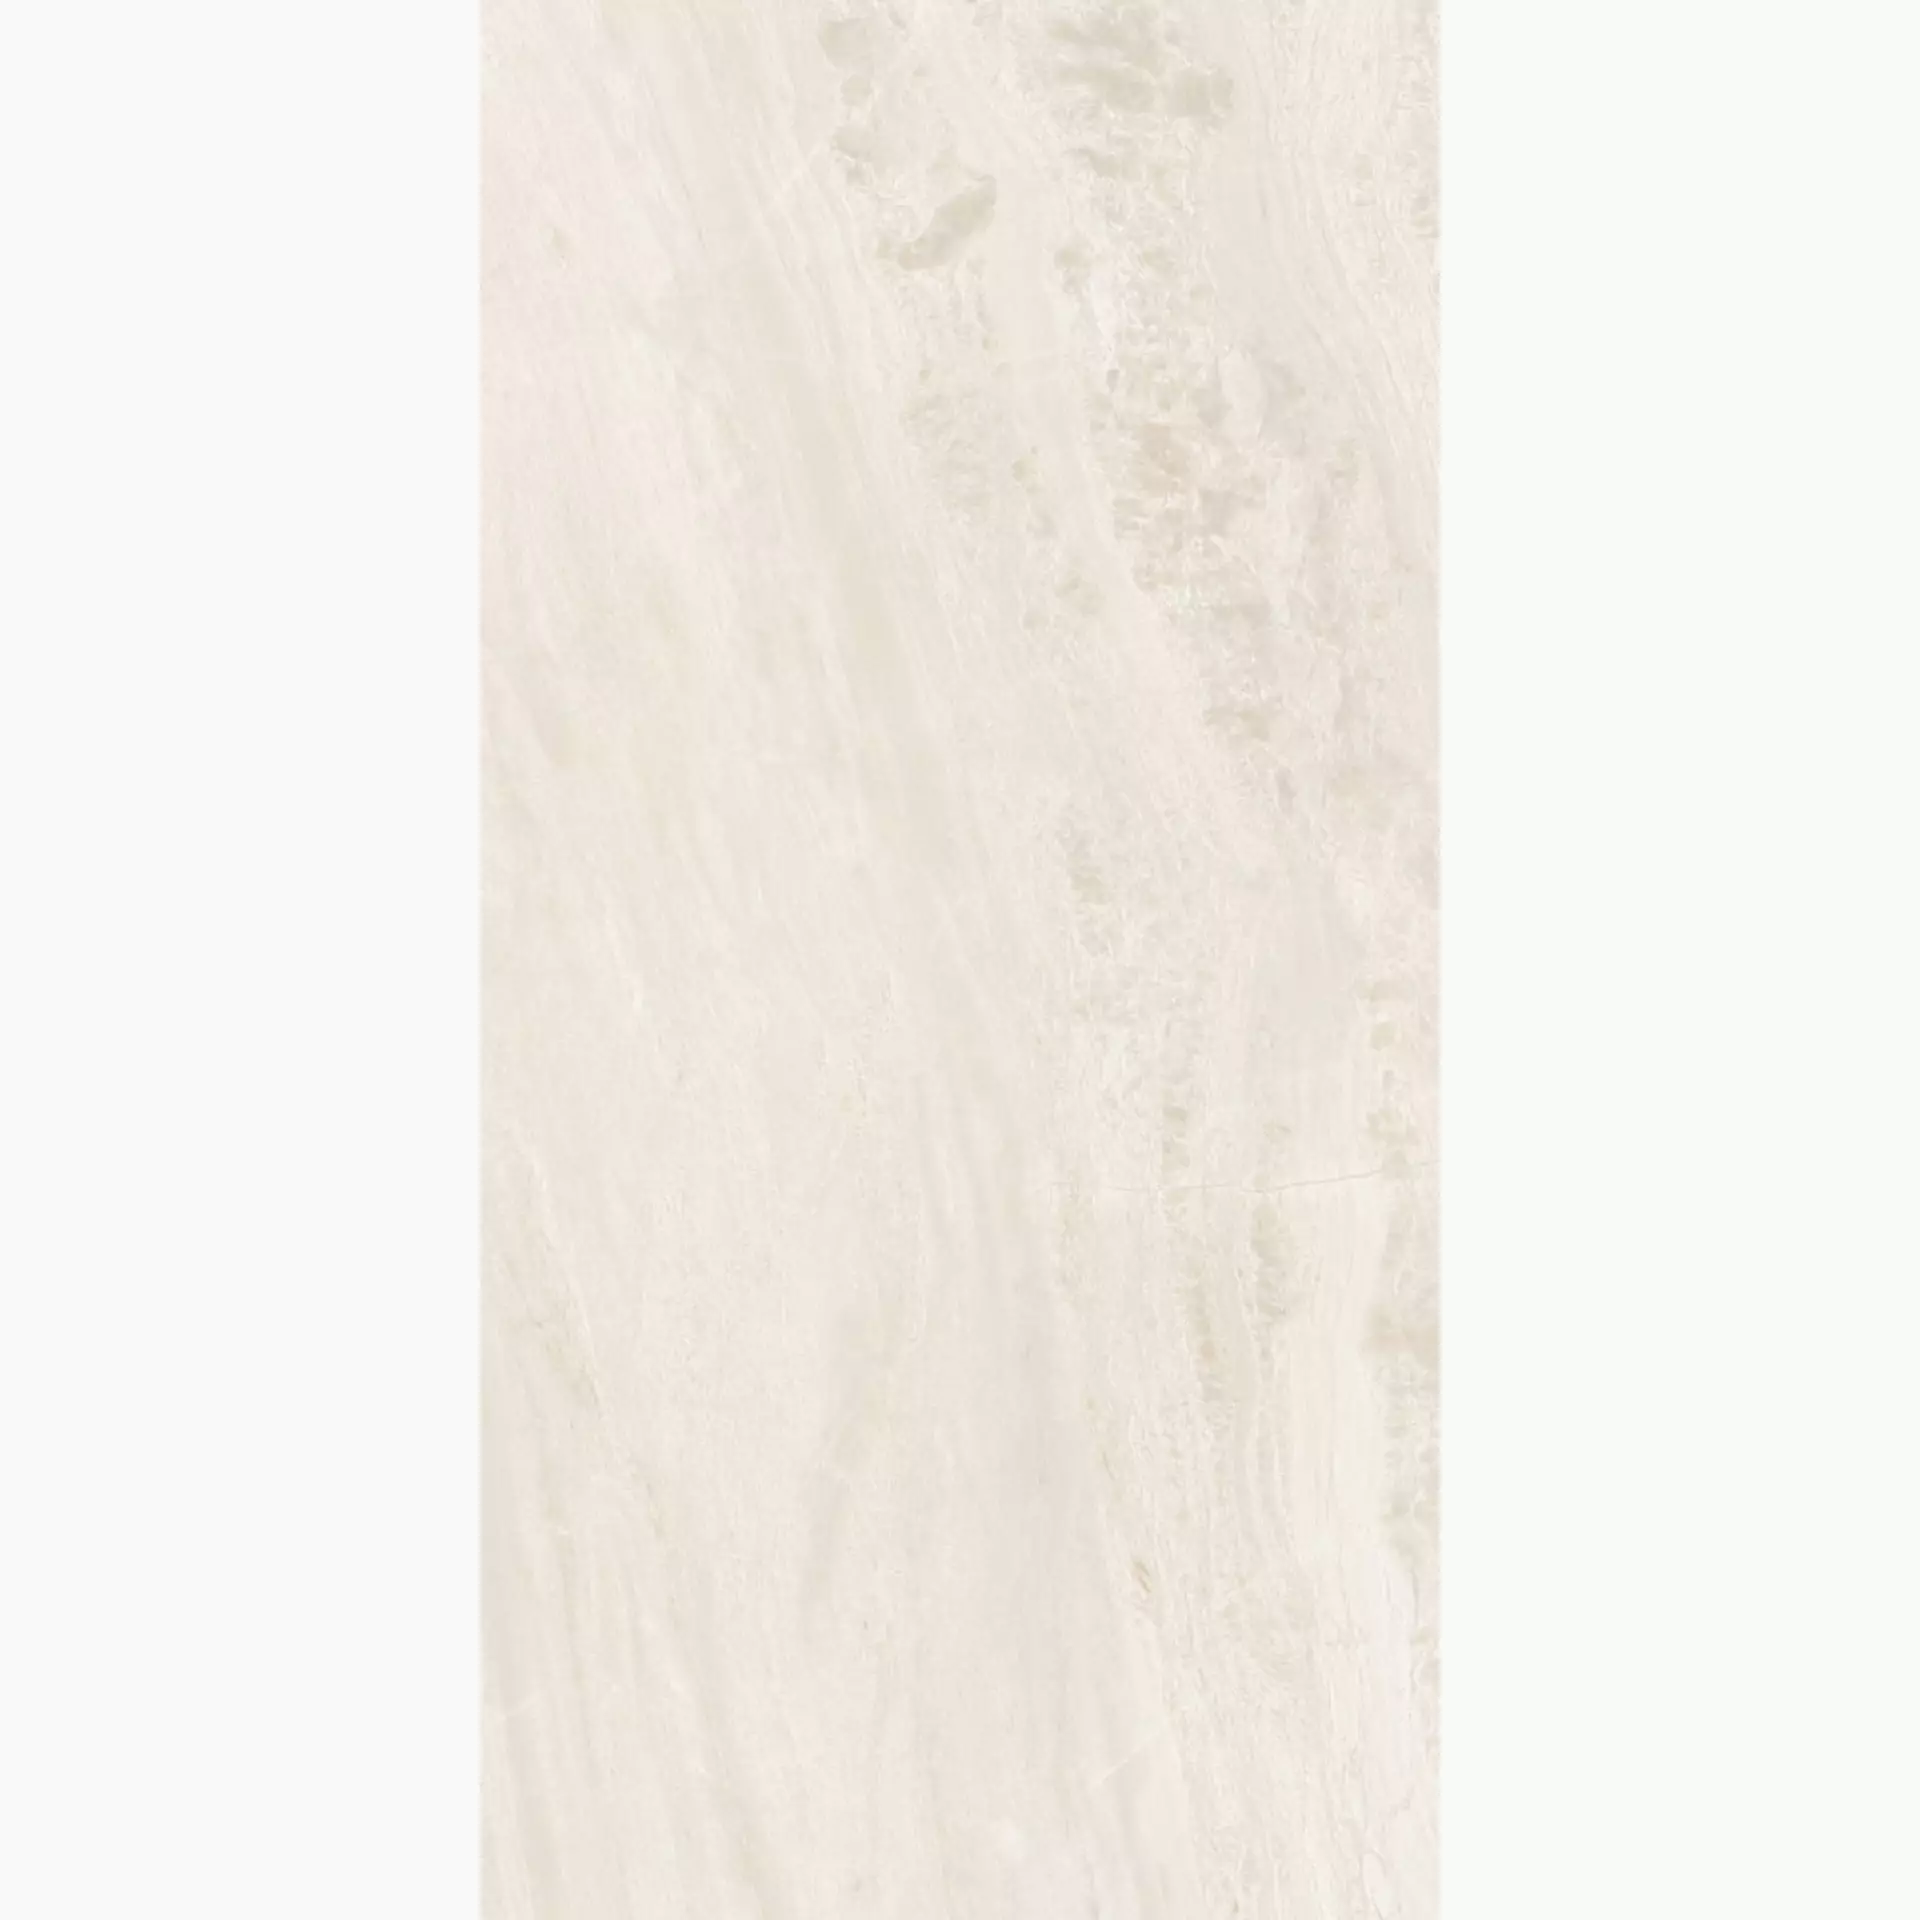 Sant Agostino Paradiso Beige Natural CSAPBEI360 30x60cm rectified 9mm